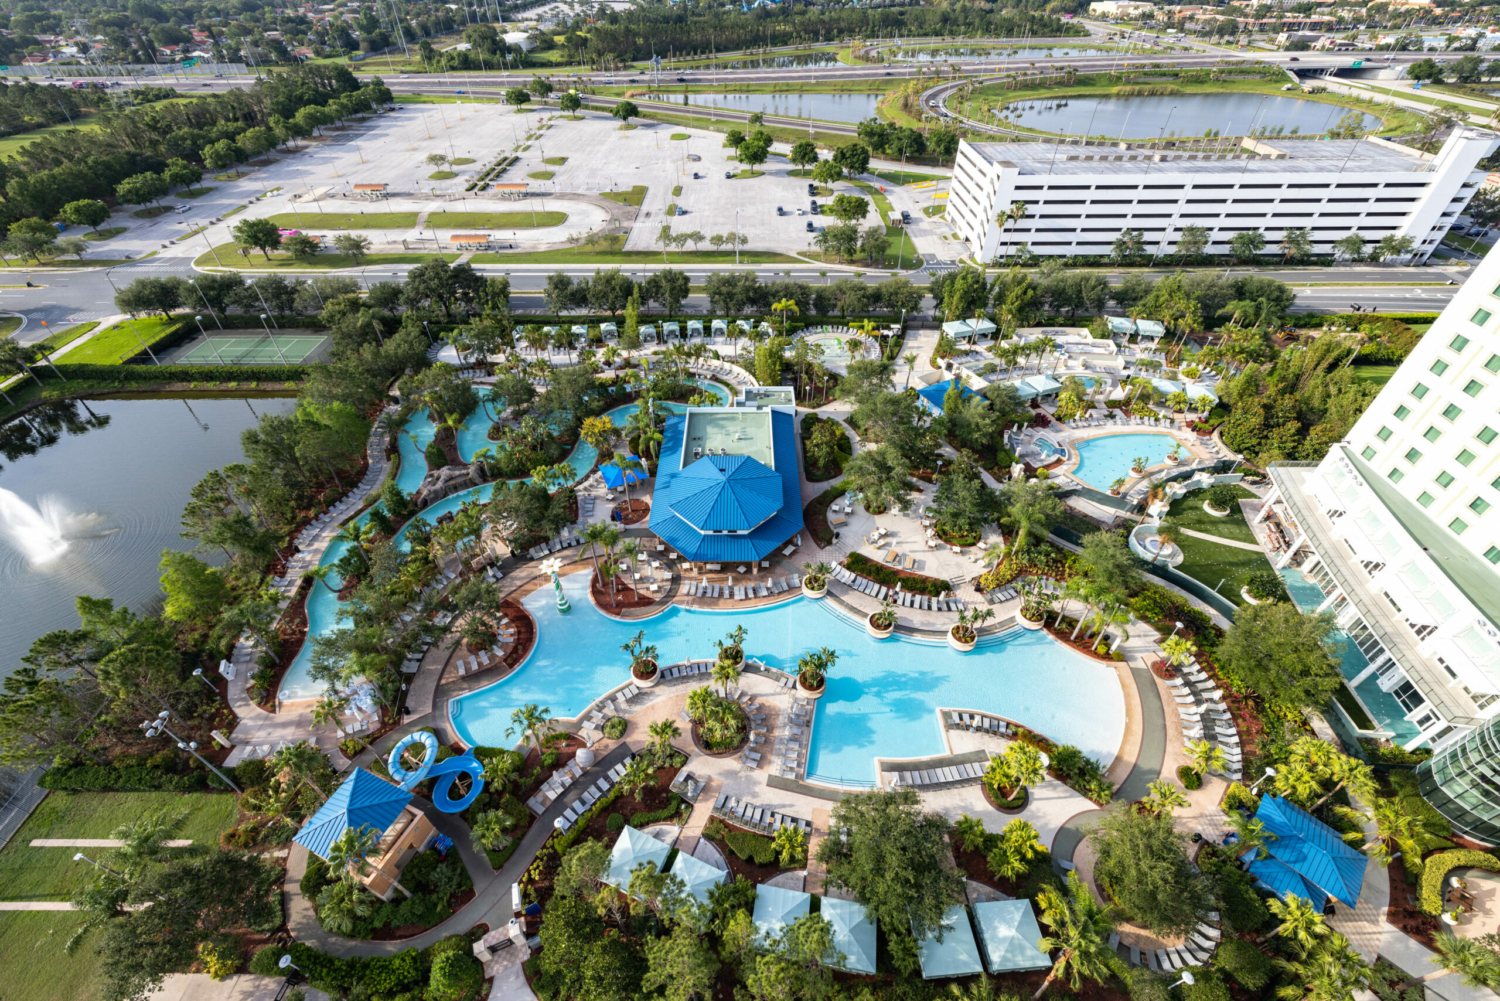 Aerial view of the pool area at hilton orlando featuring a lazy river, blue water slide, and plenty of palm trees. 